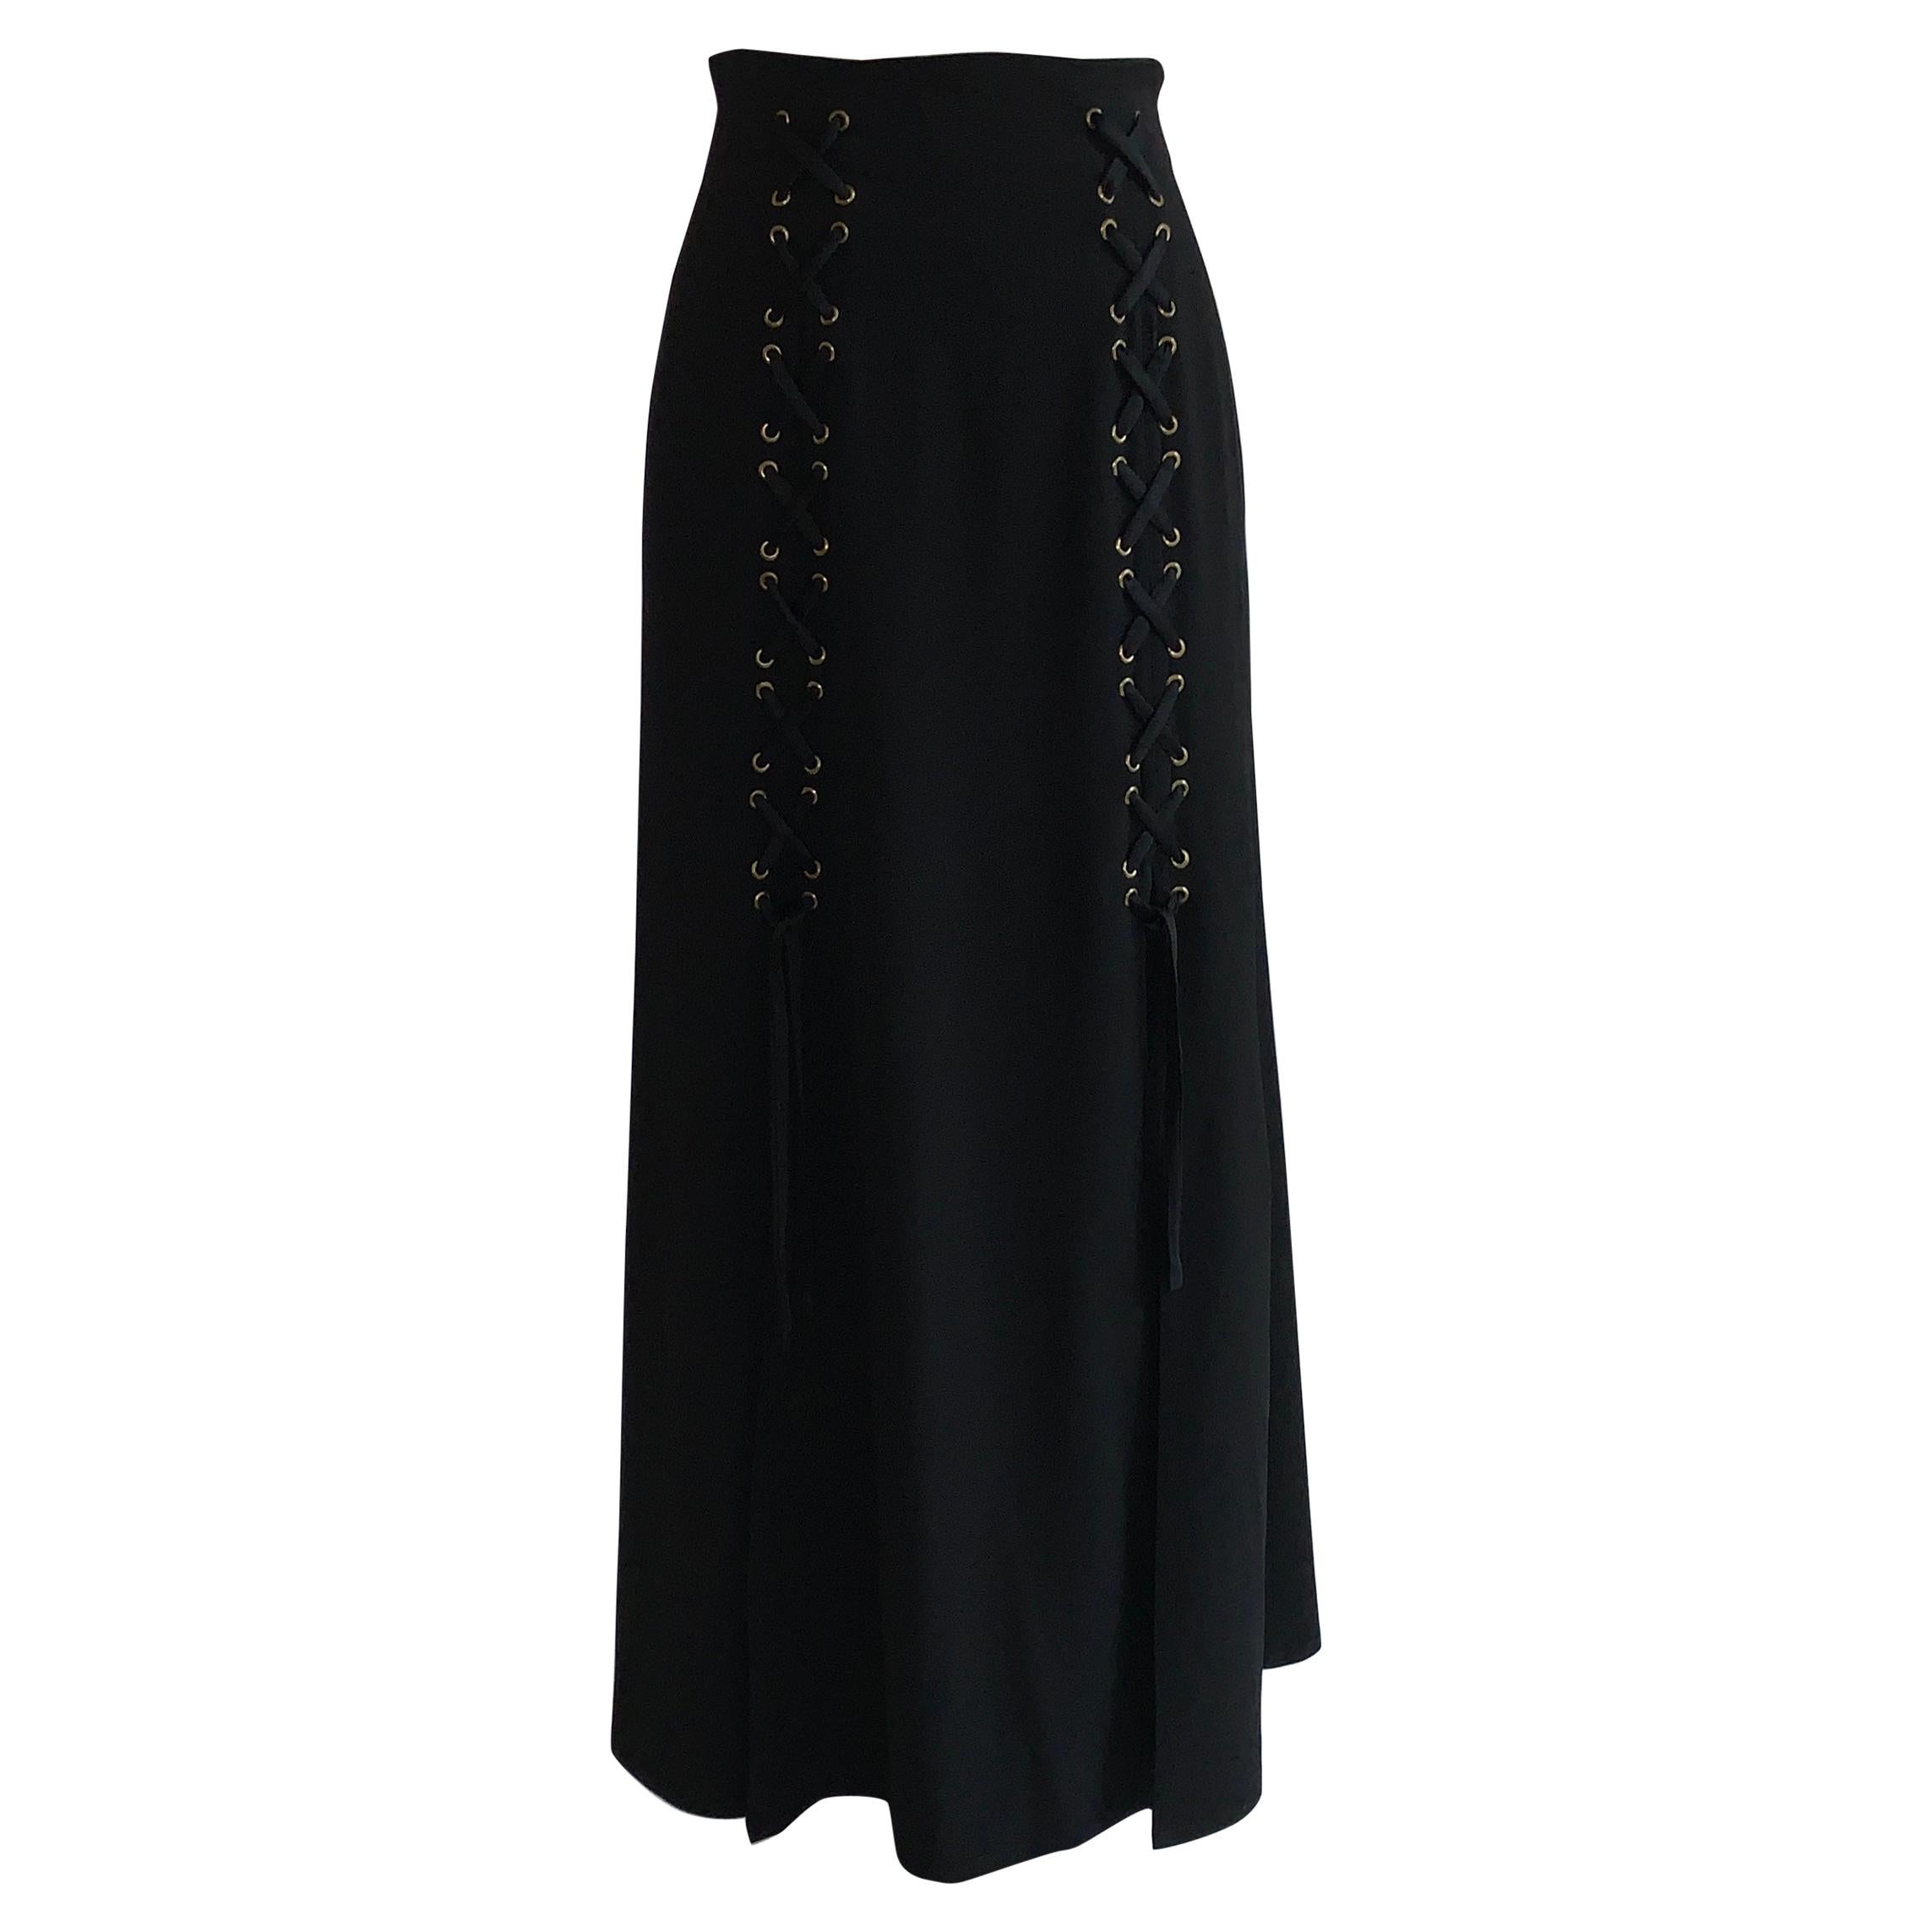 Vintage Moschino Cheap & Chic Black Lace Up Detail Maxi Skirt 1990s For Sale